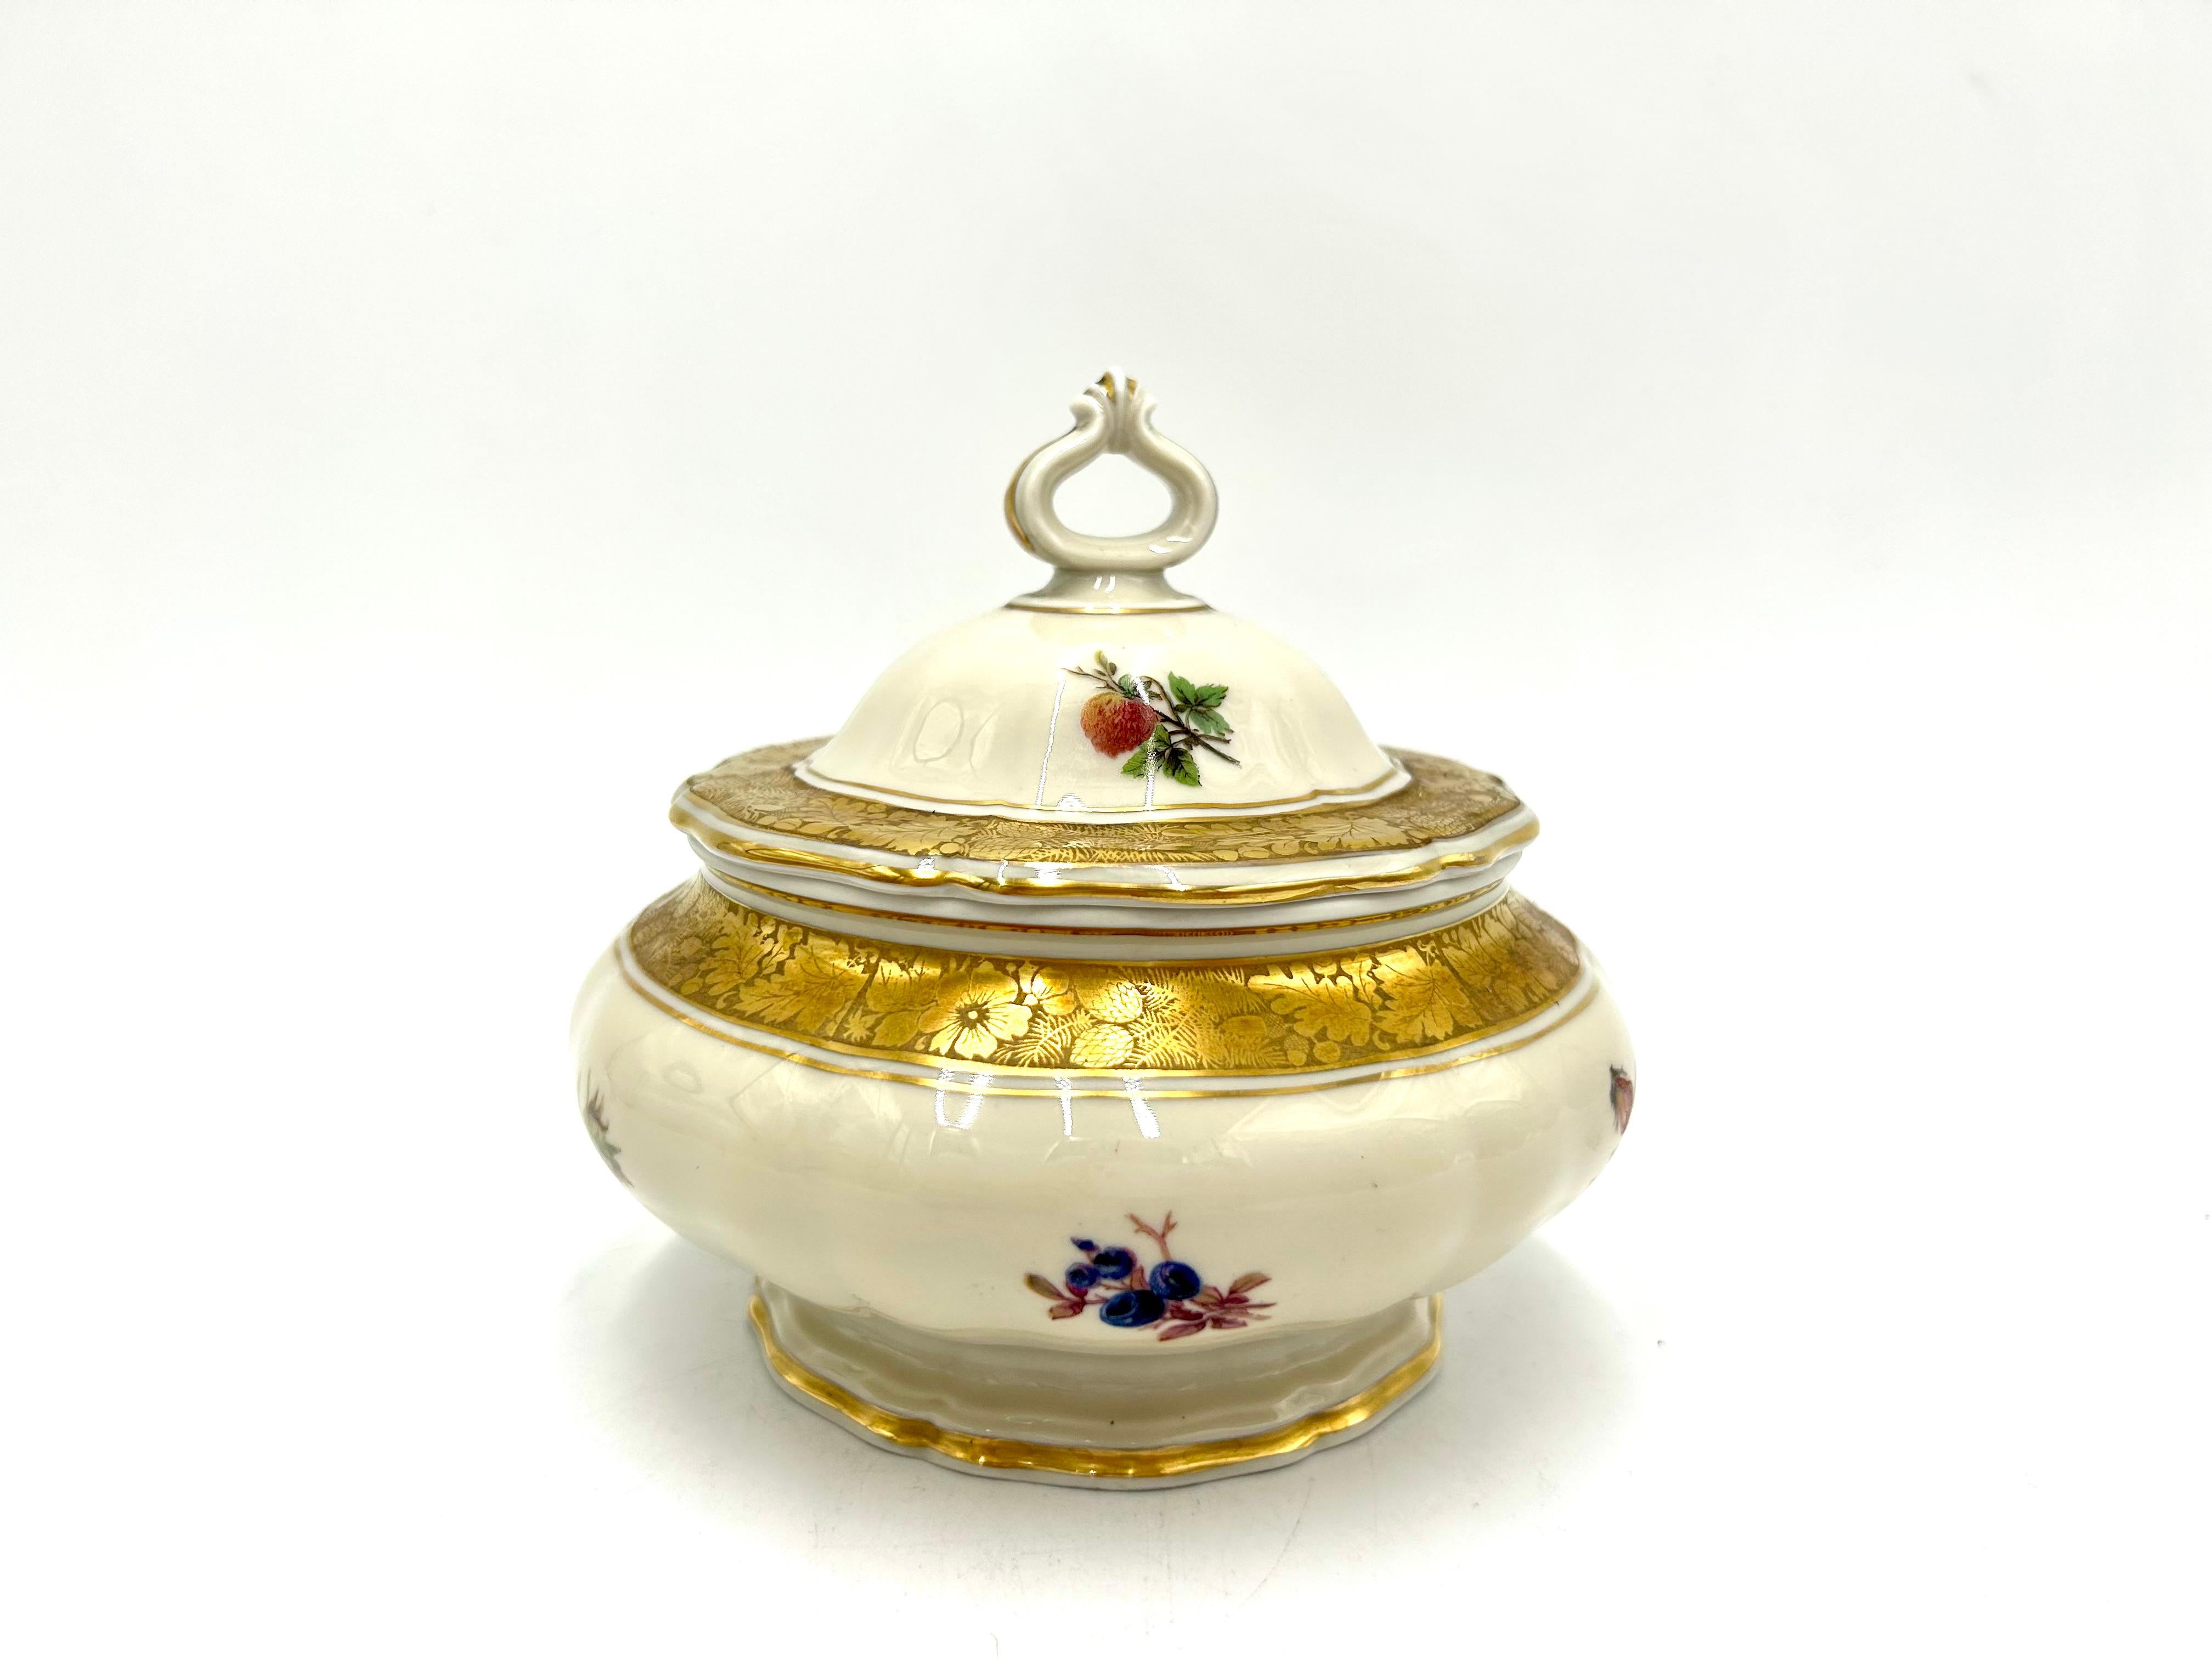 Porcelain casket with a lid - a box from the Chippendale collection, made in Germany by the excellent Rosenthal factory. Ivory-colored porcelain decorated with gilding on the edges and a delicate motif of a bouquet of flowers. The product is marked